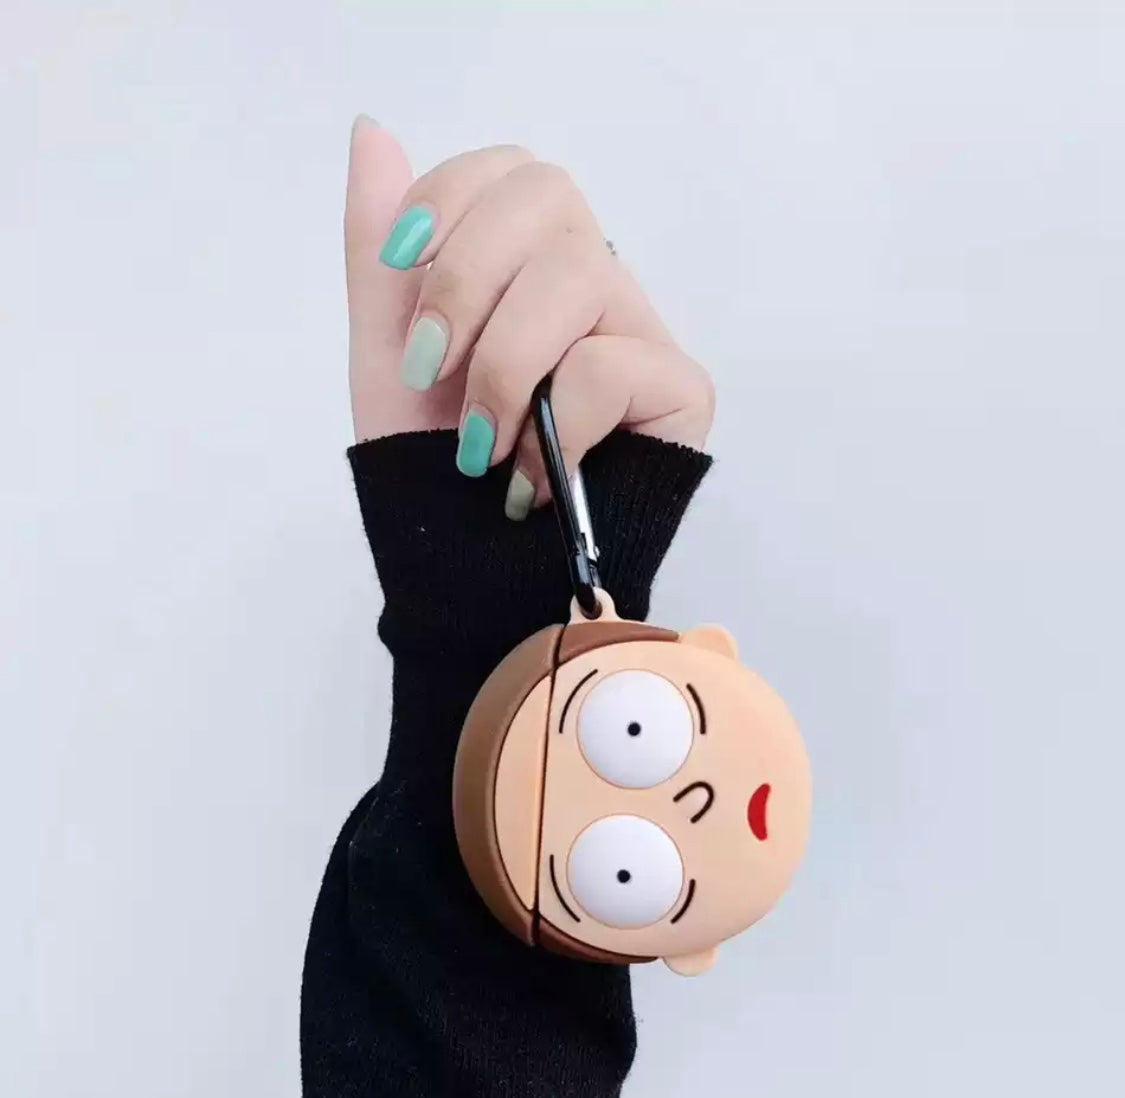 DDLGVERSE Morty Head AirPods Case